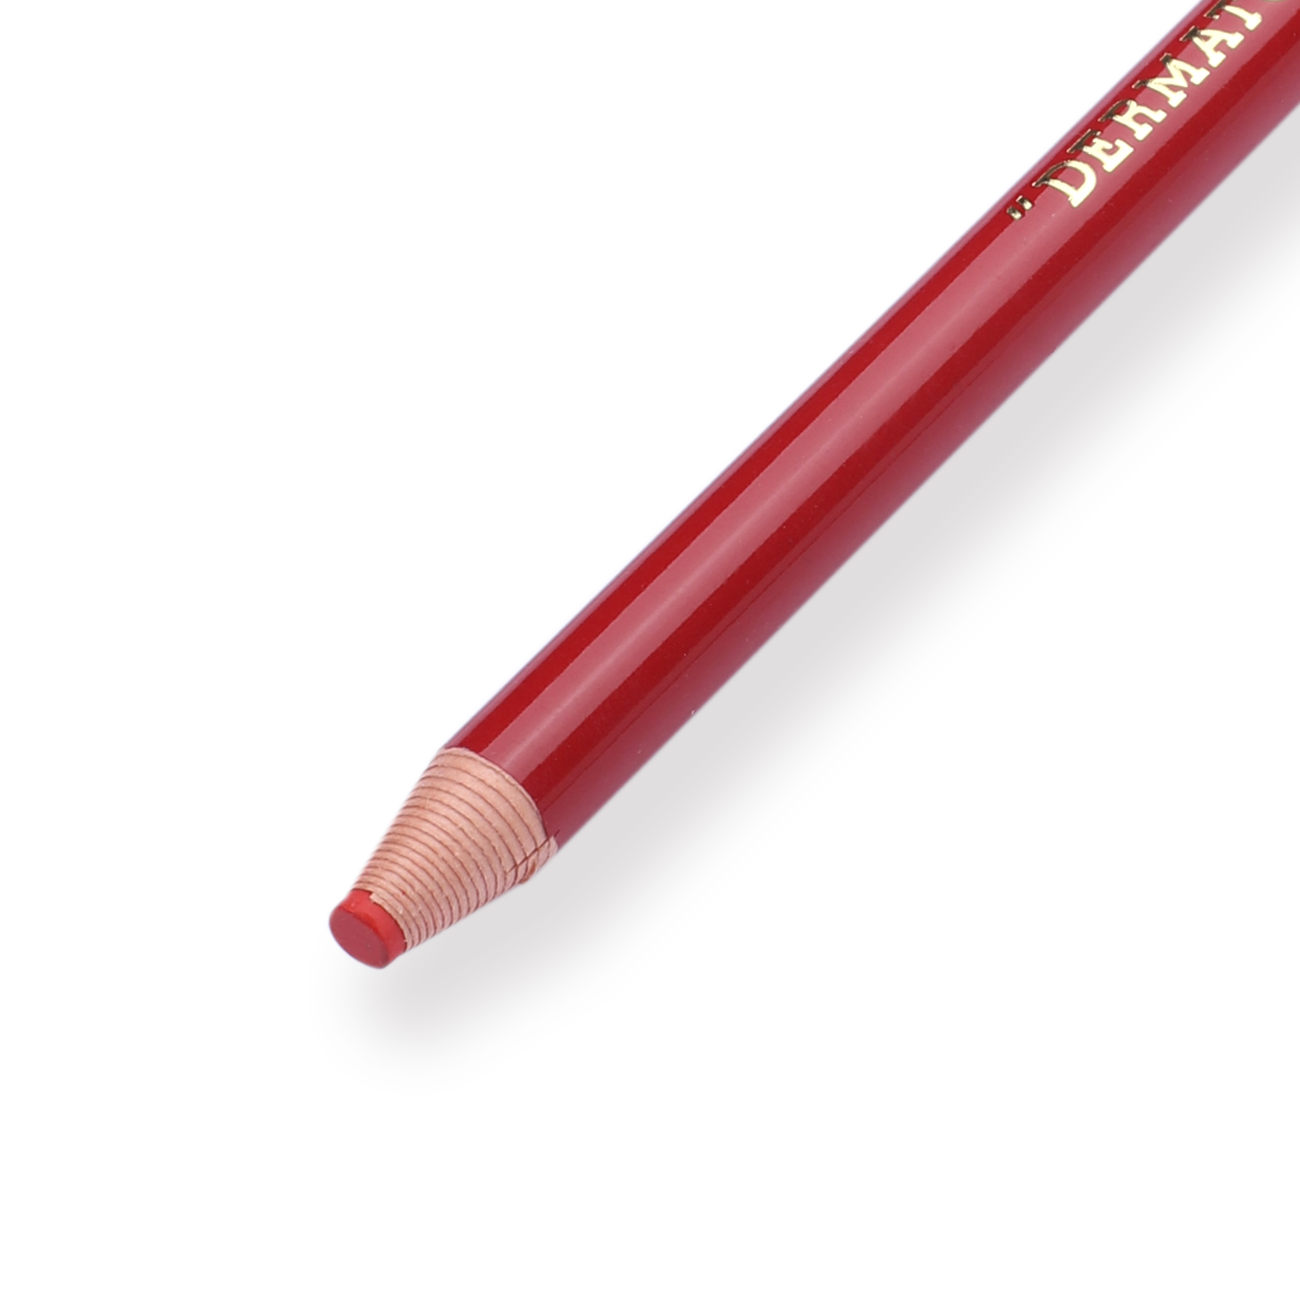 Uni-ball Dermatograph 7600 Colored Pencil - Red - Stationery Pal